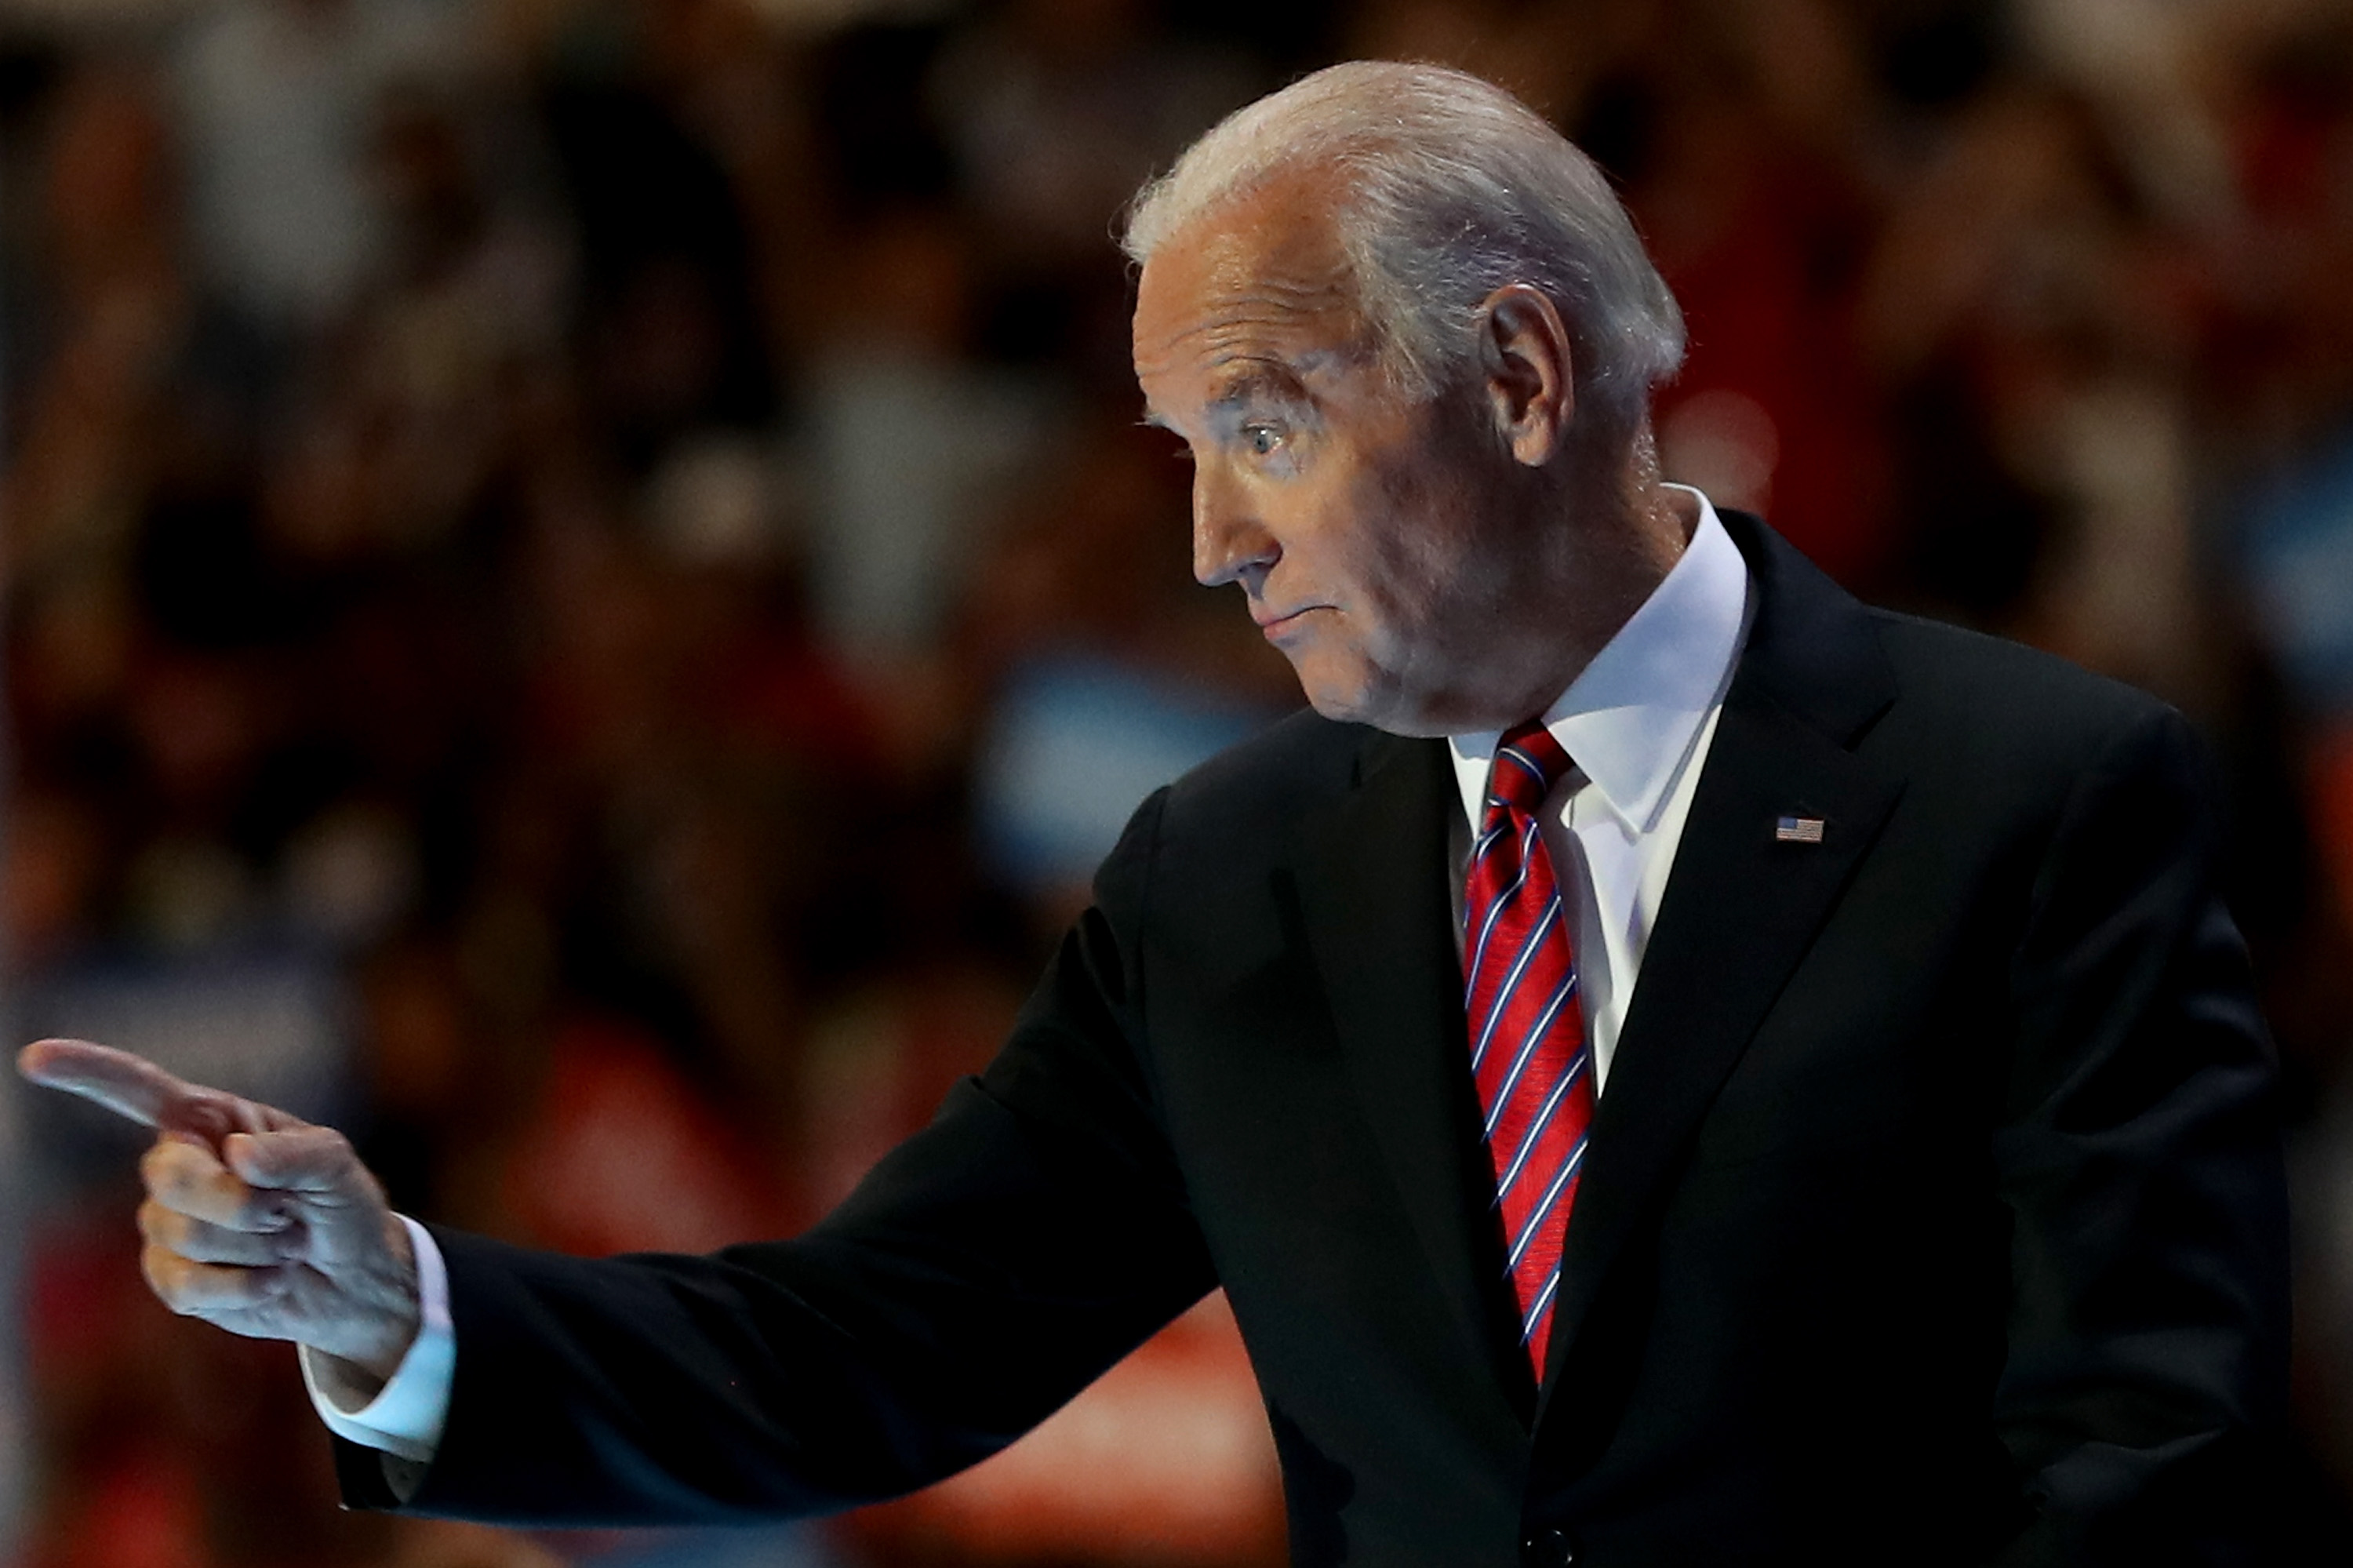 US Vice President Joe Biden delivers remarks on the third day of the Democratic National Convention at the Wells Fargo Center on July 27, 2016 in Philadelphia, Pennsylvania. (Joe Raedle&mdash;Getty Images)